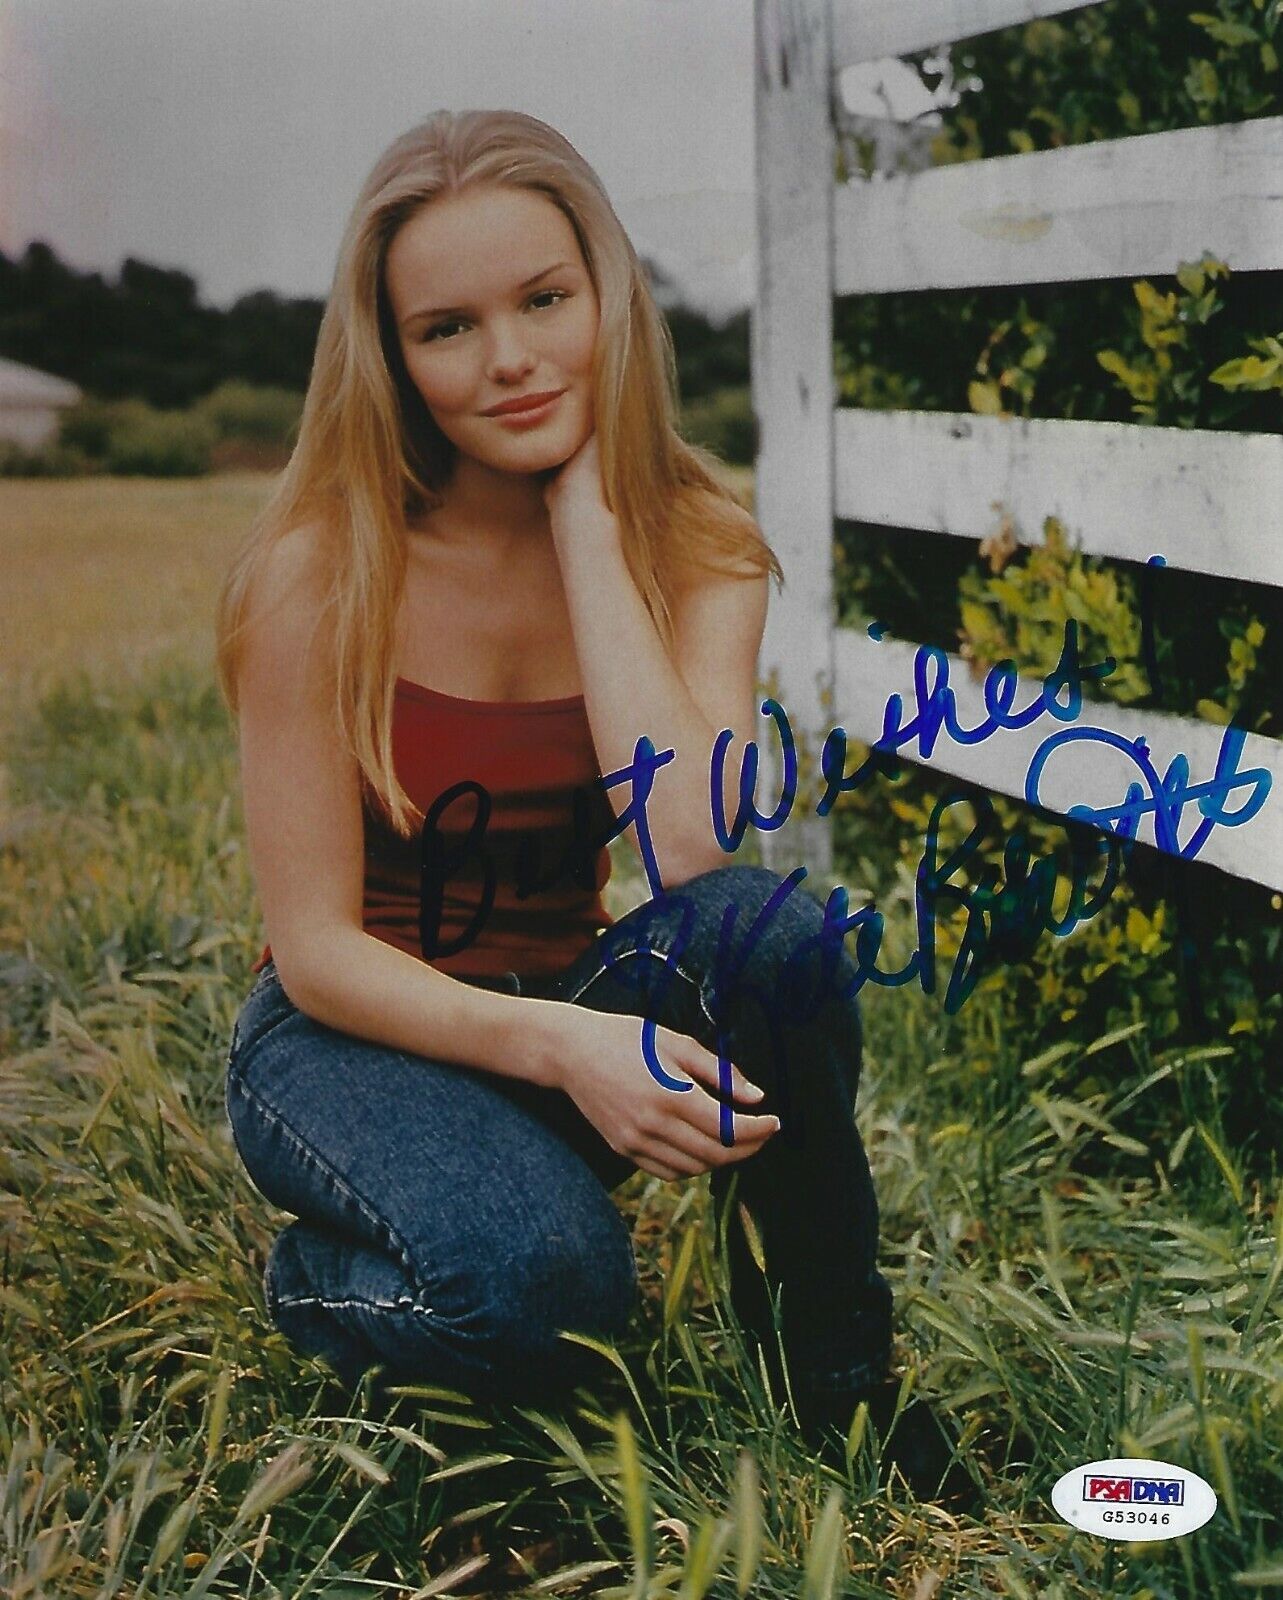 Kate Bosworth Signed 8x10 Photo Poster painting PSA/DNA COA Picture RARE FULL Autograph 21 Heist